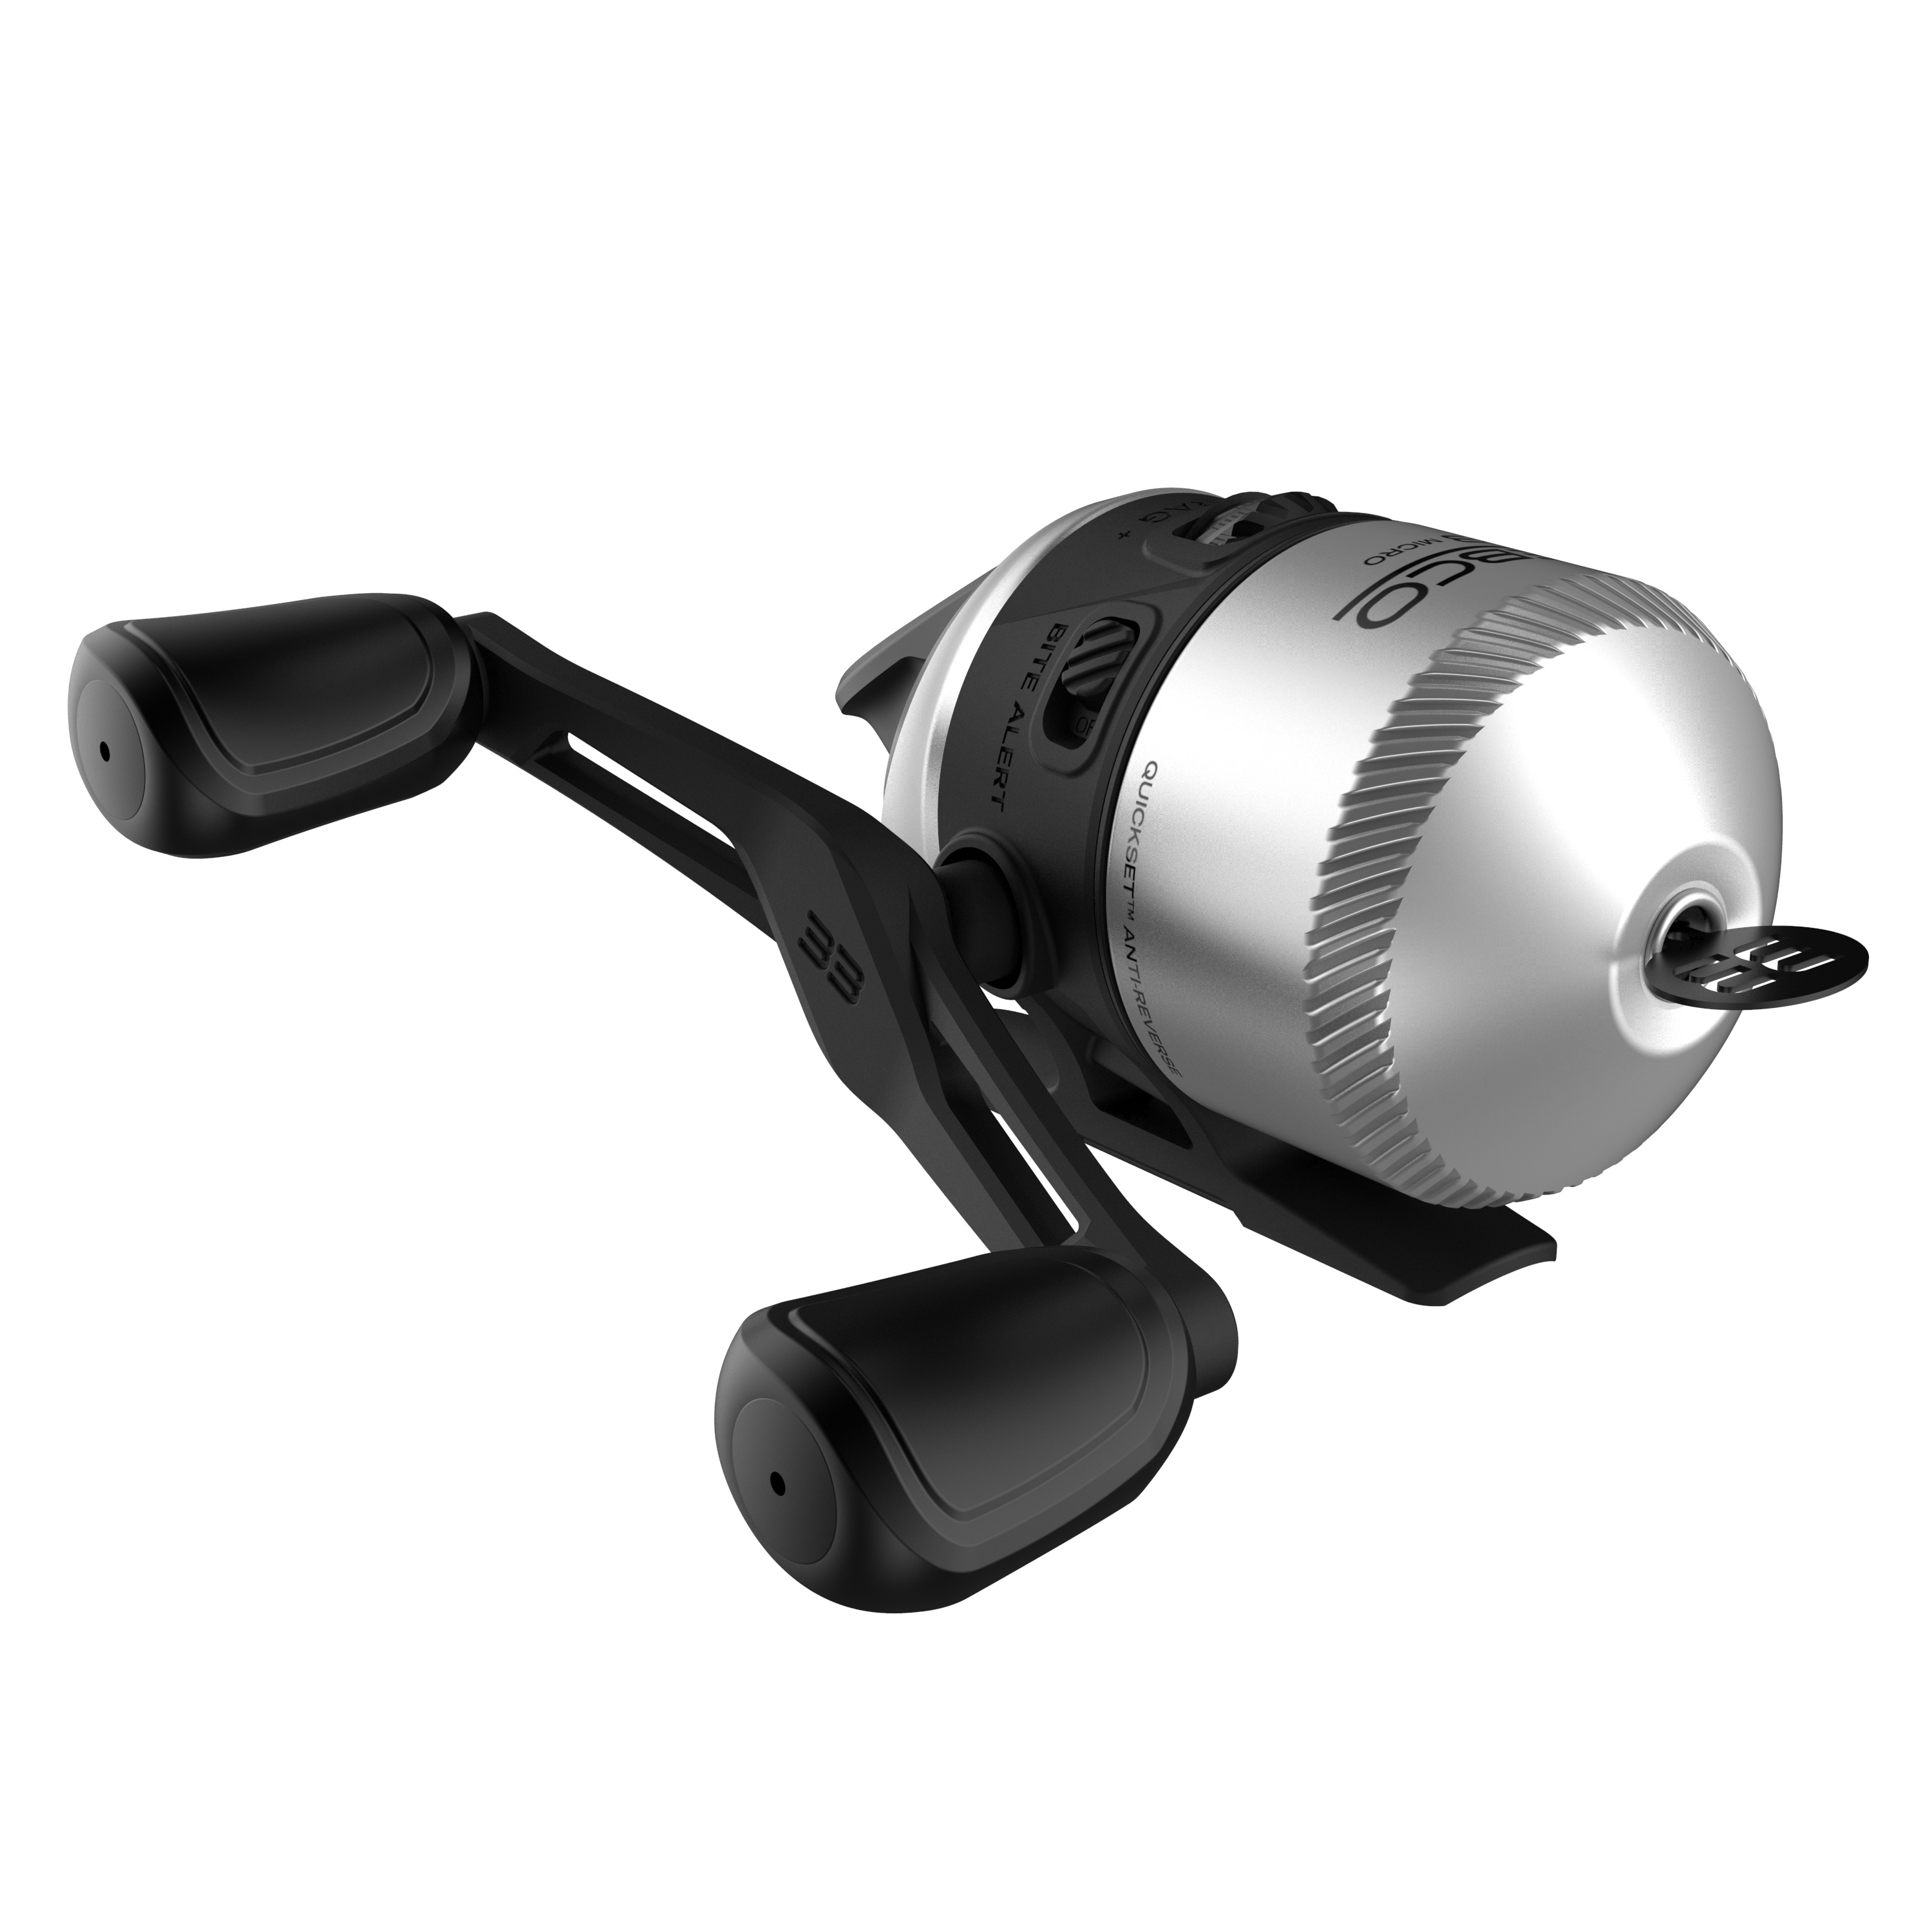 Fishing Reel, Spinning Fishing Reels, Mini Fishing Reels, Ultra Light And  Smooth Fishing Reel, Left/right Interchangeable Metal Handle, For Fishing